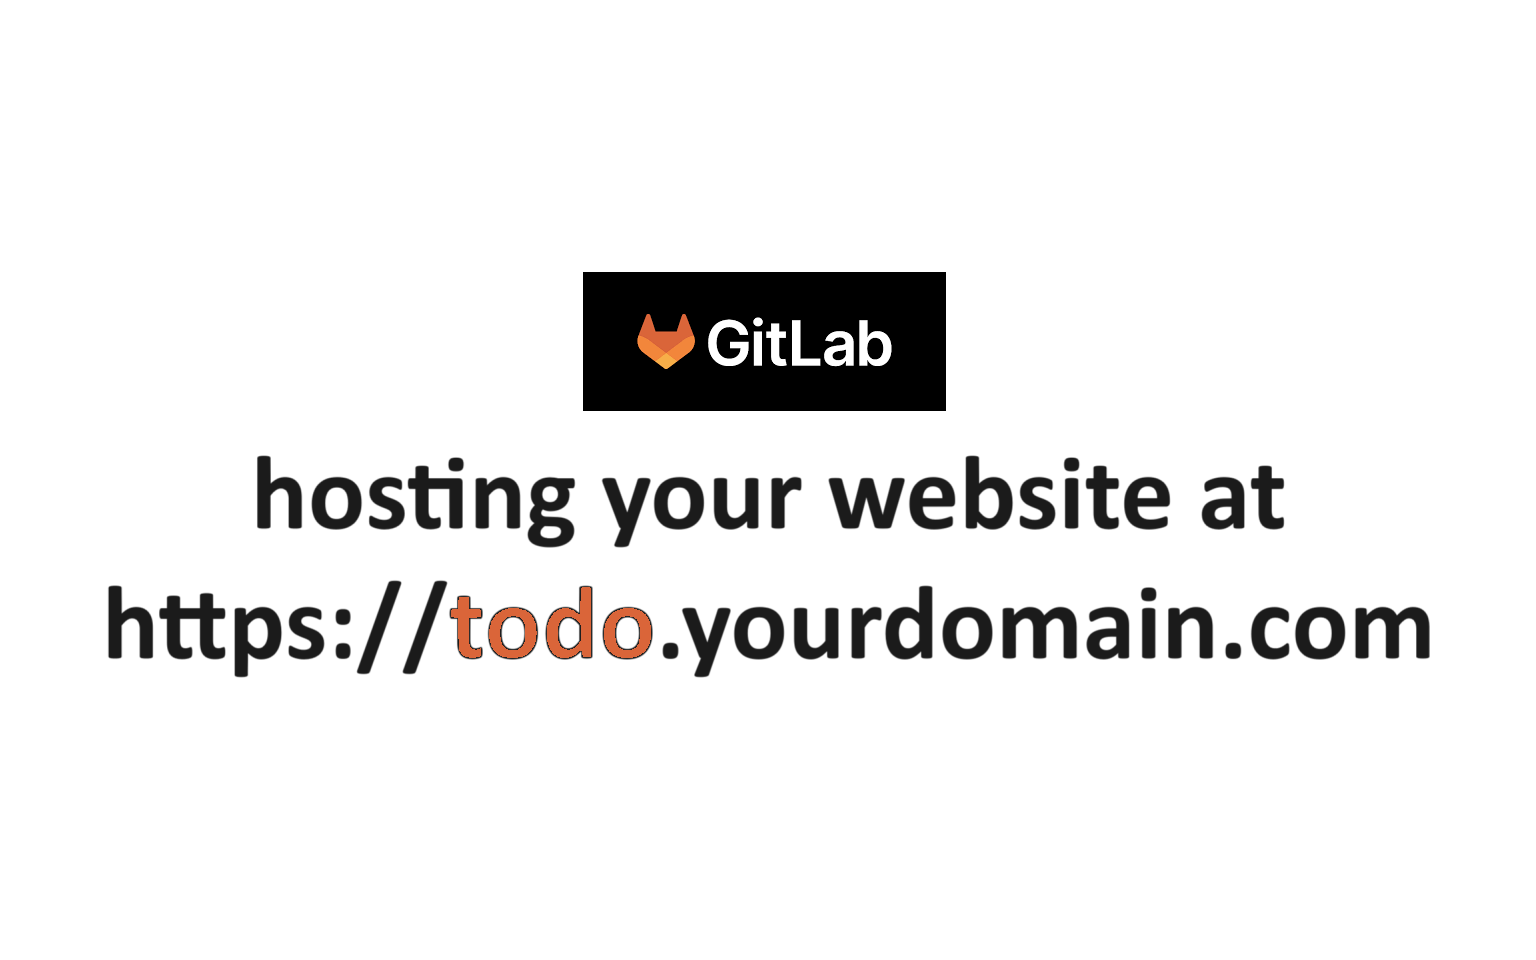 Goal of the article is to setup gitlab pages